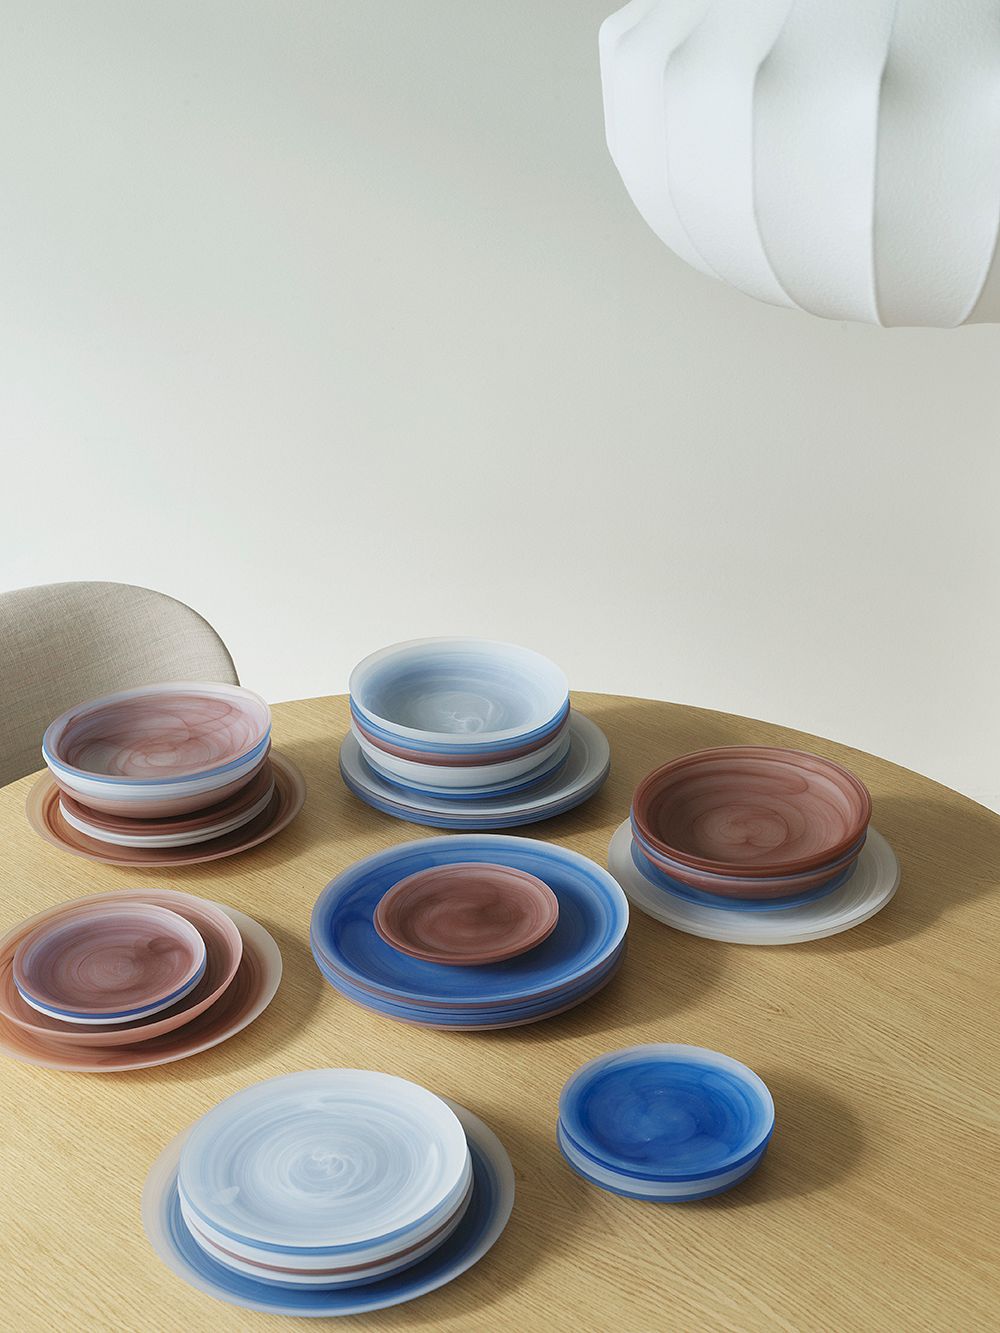 Normann Copenhagen Cosmic glass plates in blue, brown and white